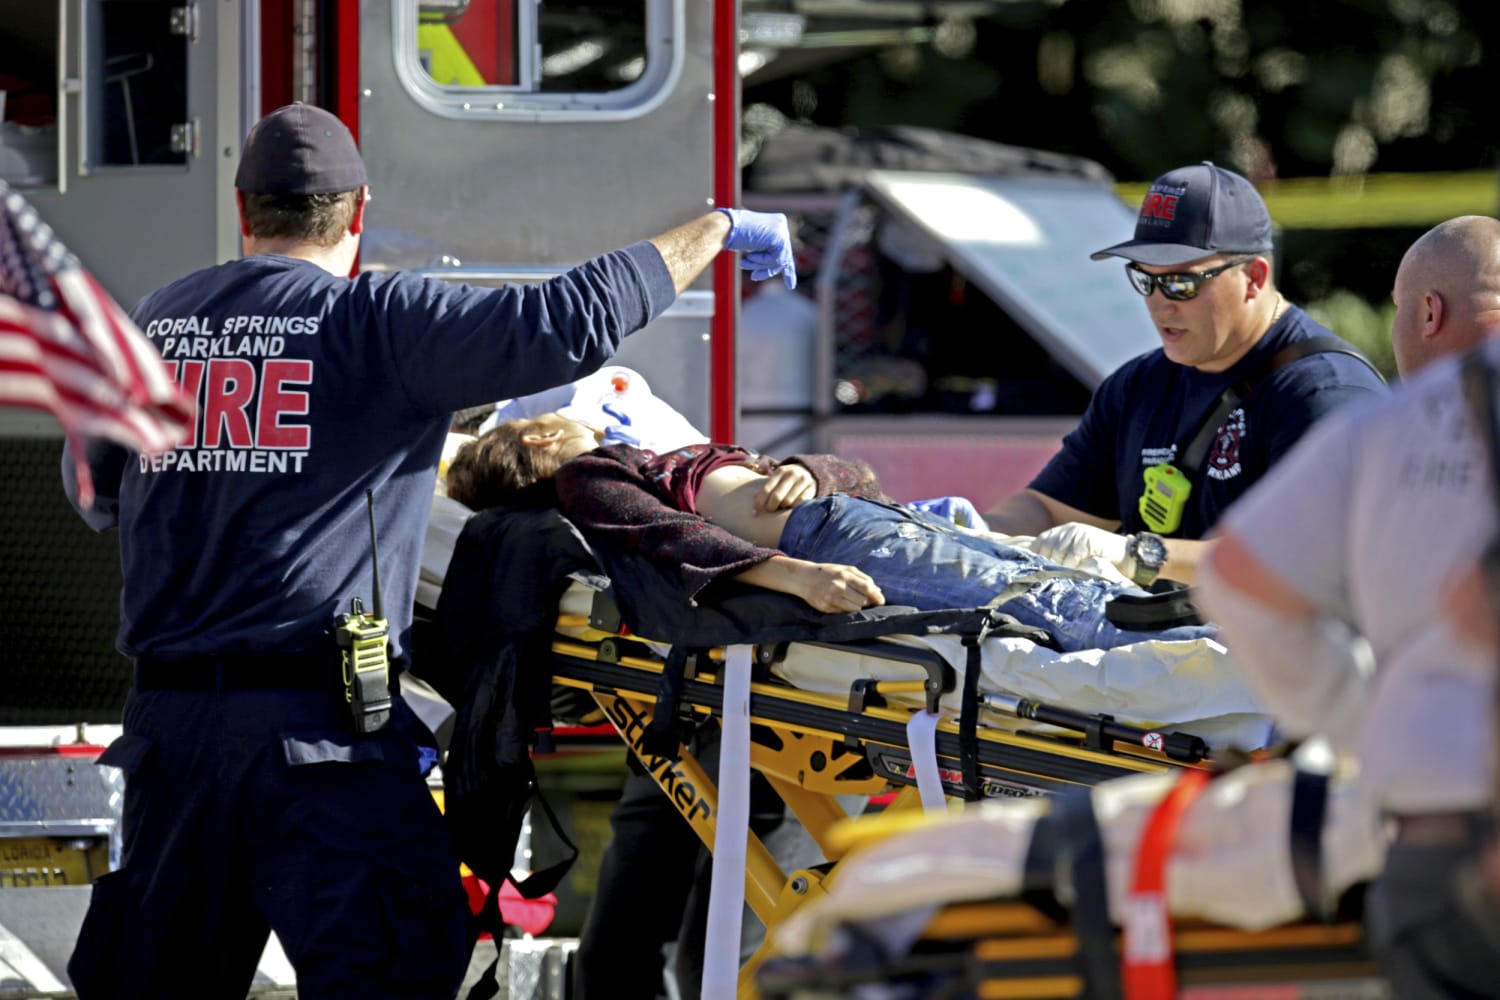 17 killed in mass shooting at high school in Parkland, Florida